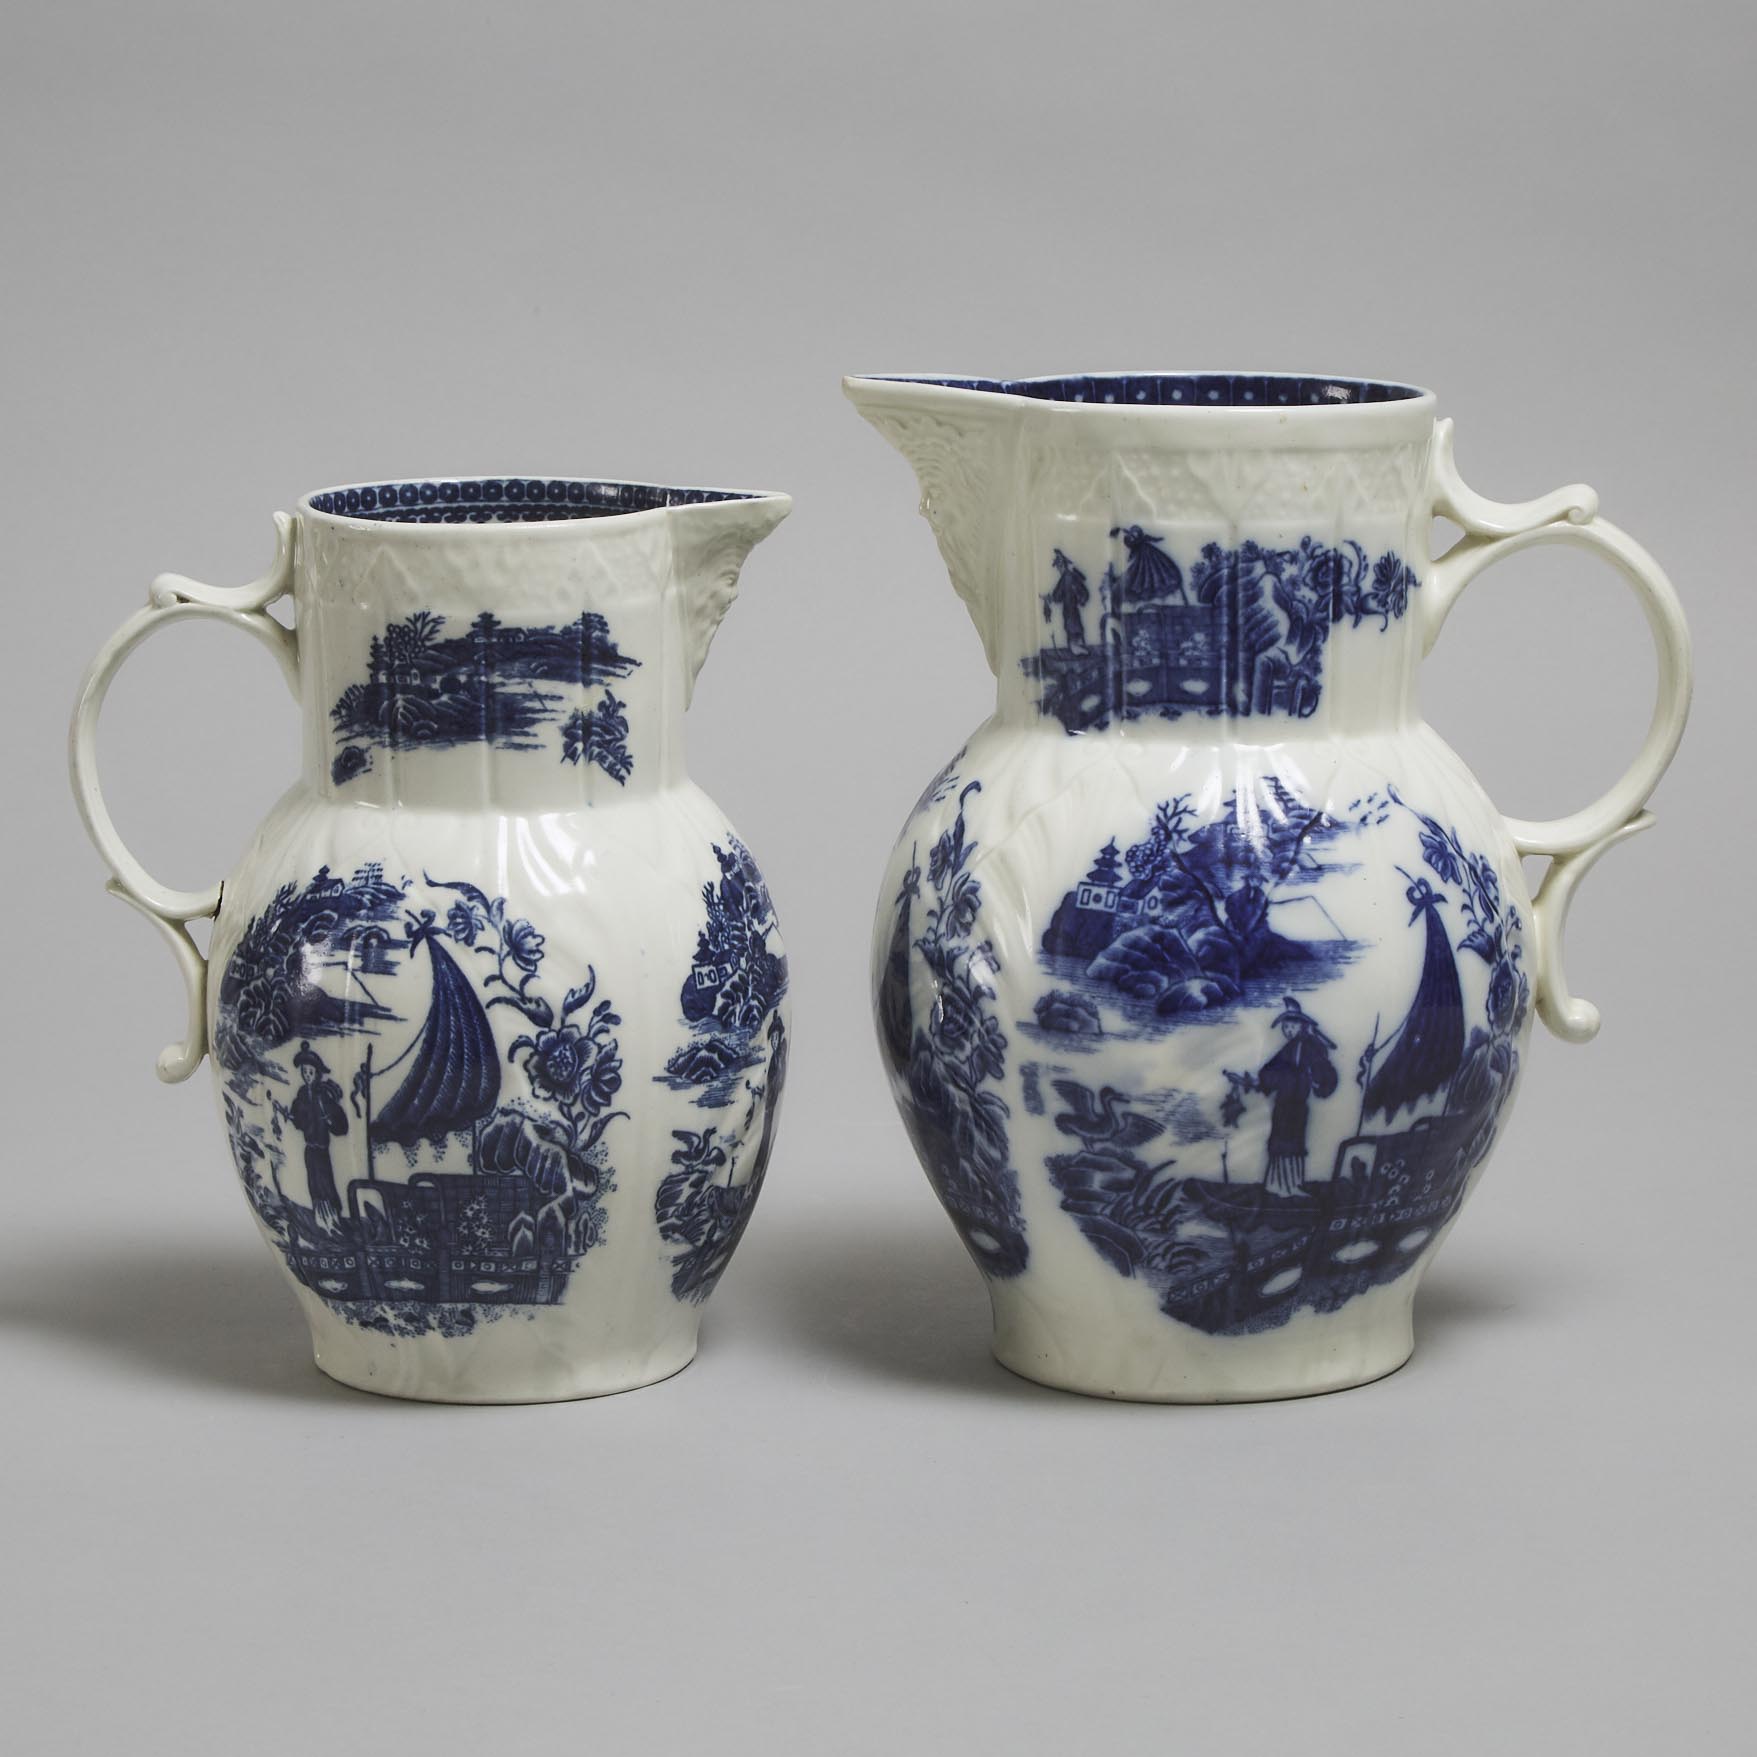 Two Caughley 'Fisherman' Moulded Cabbage Leaf and Mask Jugs, c.1780-90